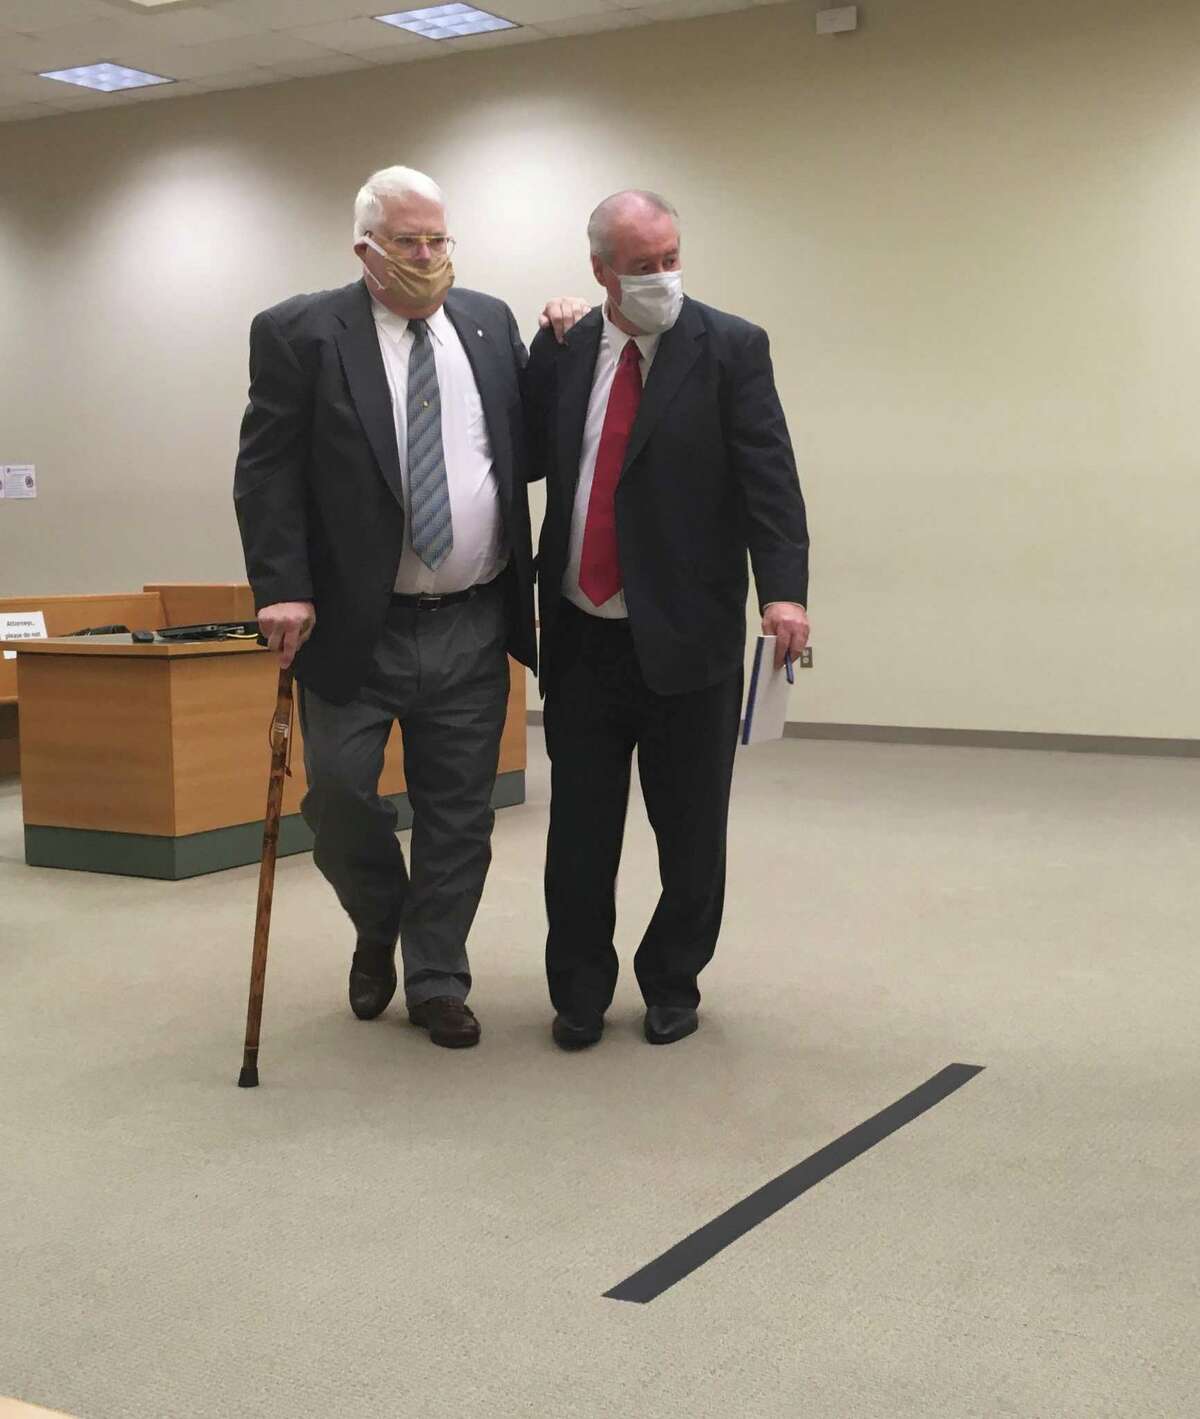 Richard Commaille, 70, left, is led by his attorney Edward Gavin, right, to appear in Waterbury Superior Court on June 10, 2020.